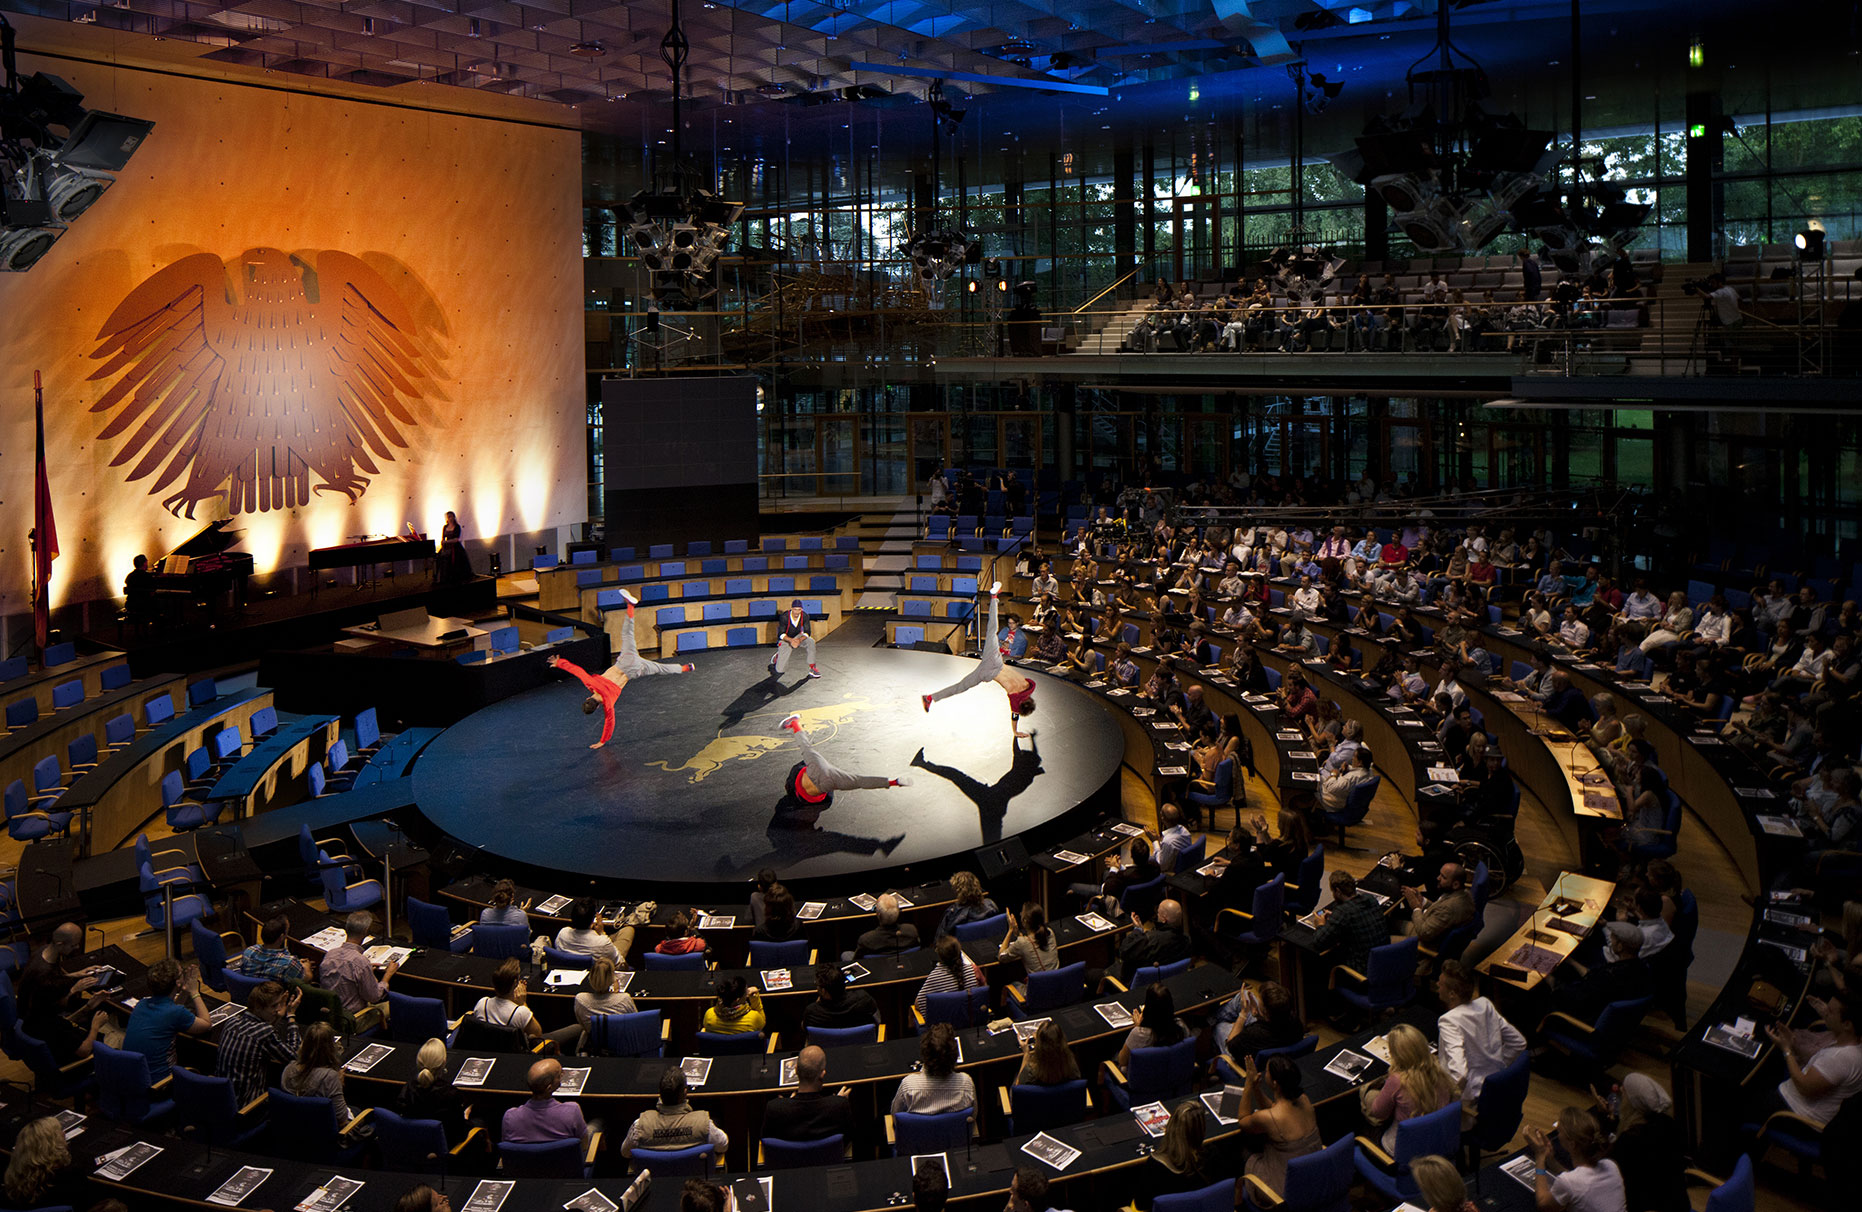 © Dirk Mathesius, Flying Steps performs Red Bull Flying Bach at Bundestag in Bonn, Client Red Bull